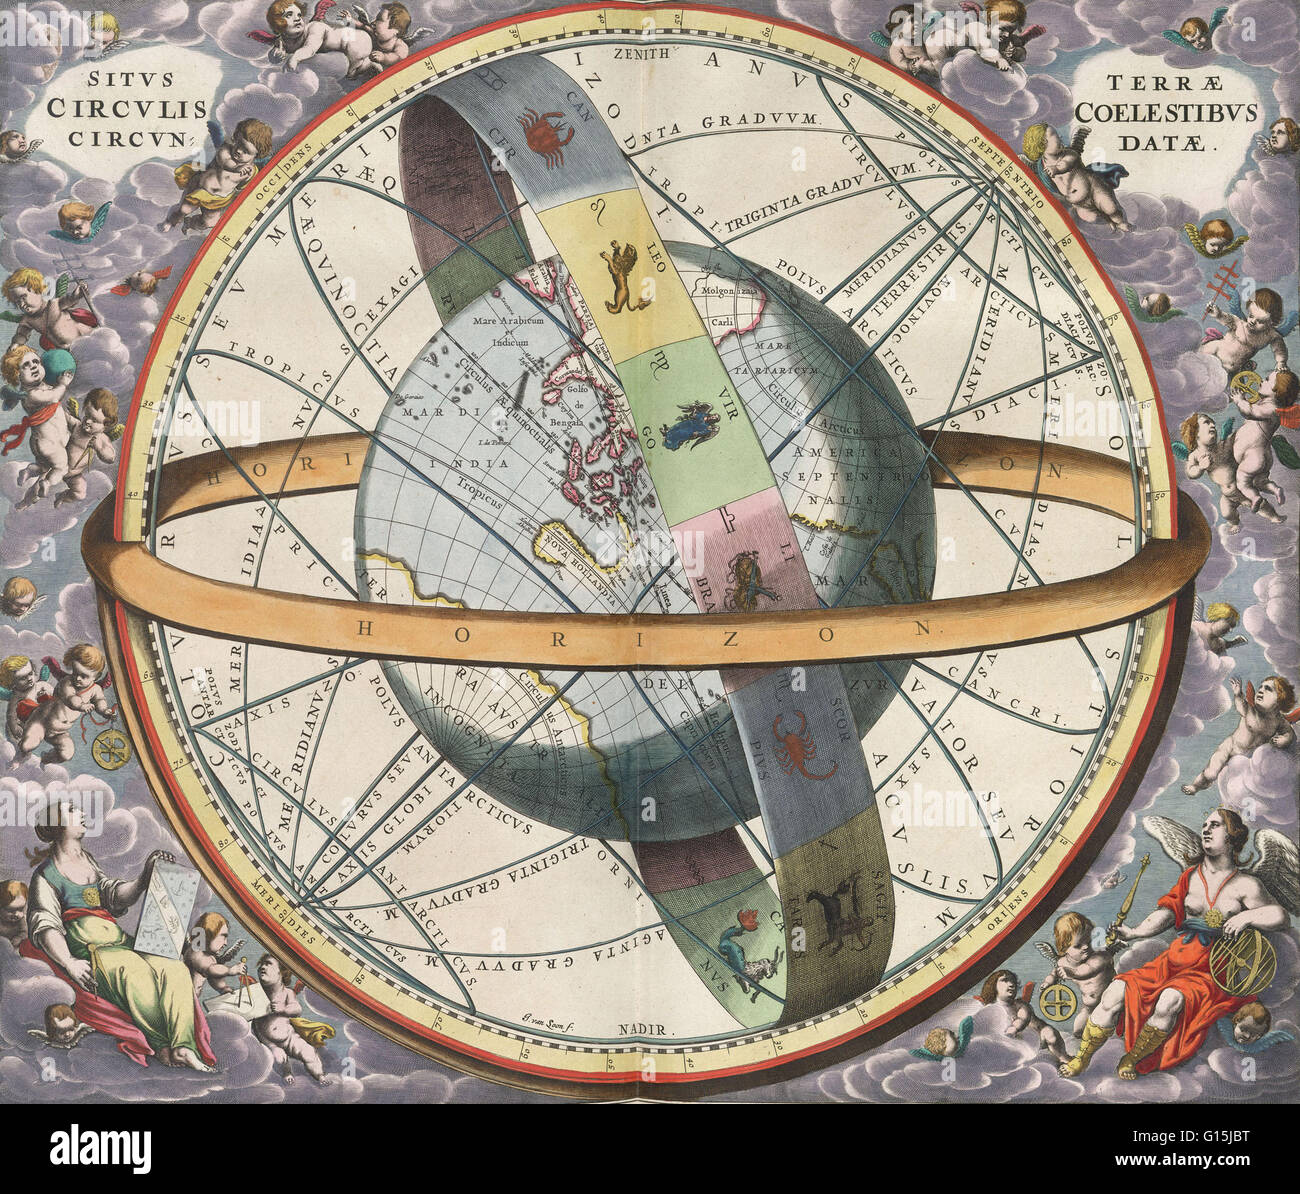 Sitvs terrae circvlis coelestibvs circvndatae. The location of the Earth encircled by the celestial circles. Richly ornamented scheme of the positions of the Globe relatively to the ecliptic axes and the Zodiac. Illustration by Andreas Cellarius (1596-166 Stock Photo